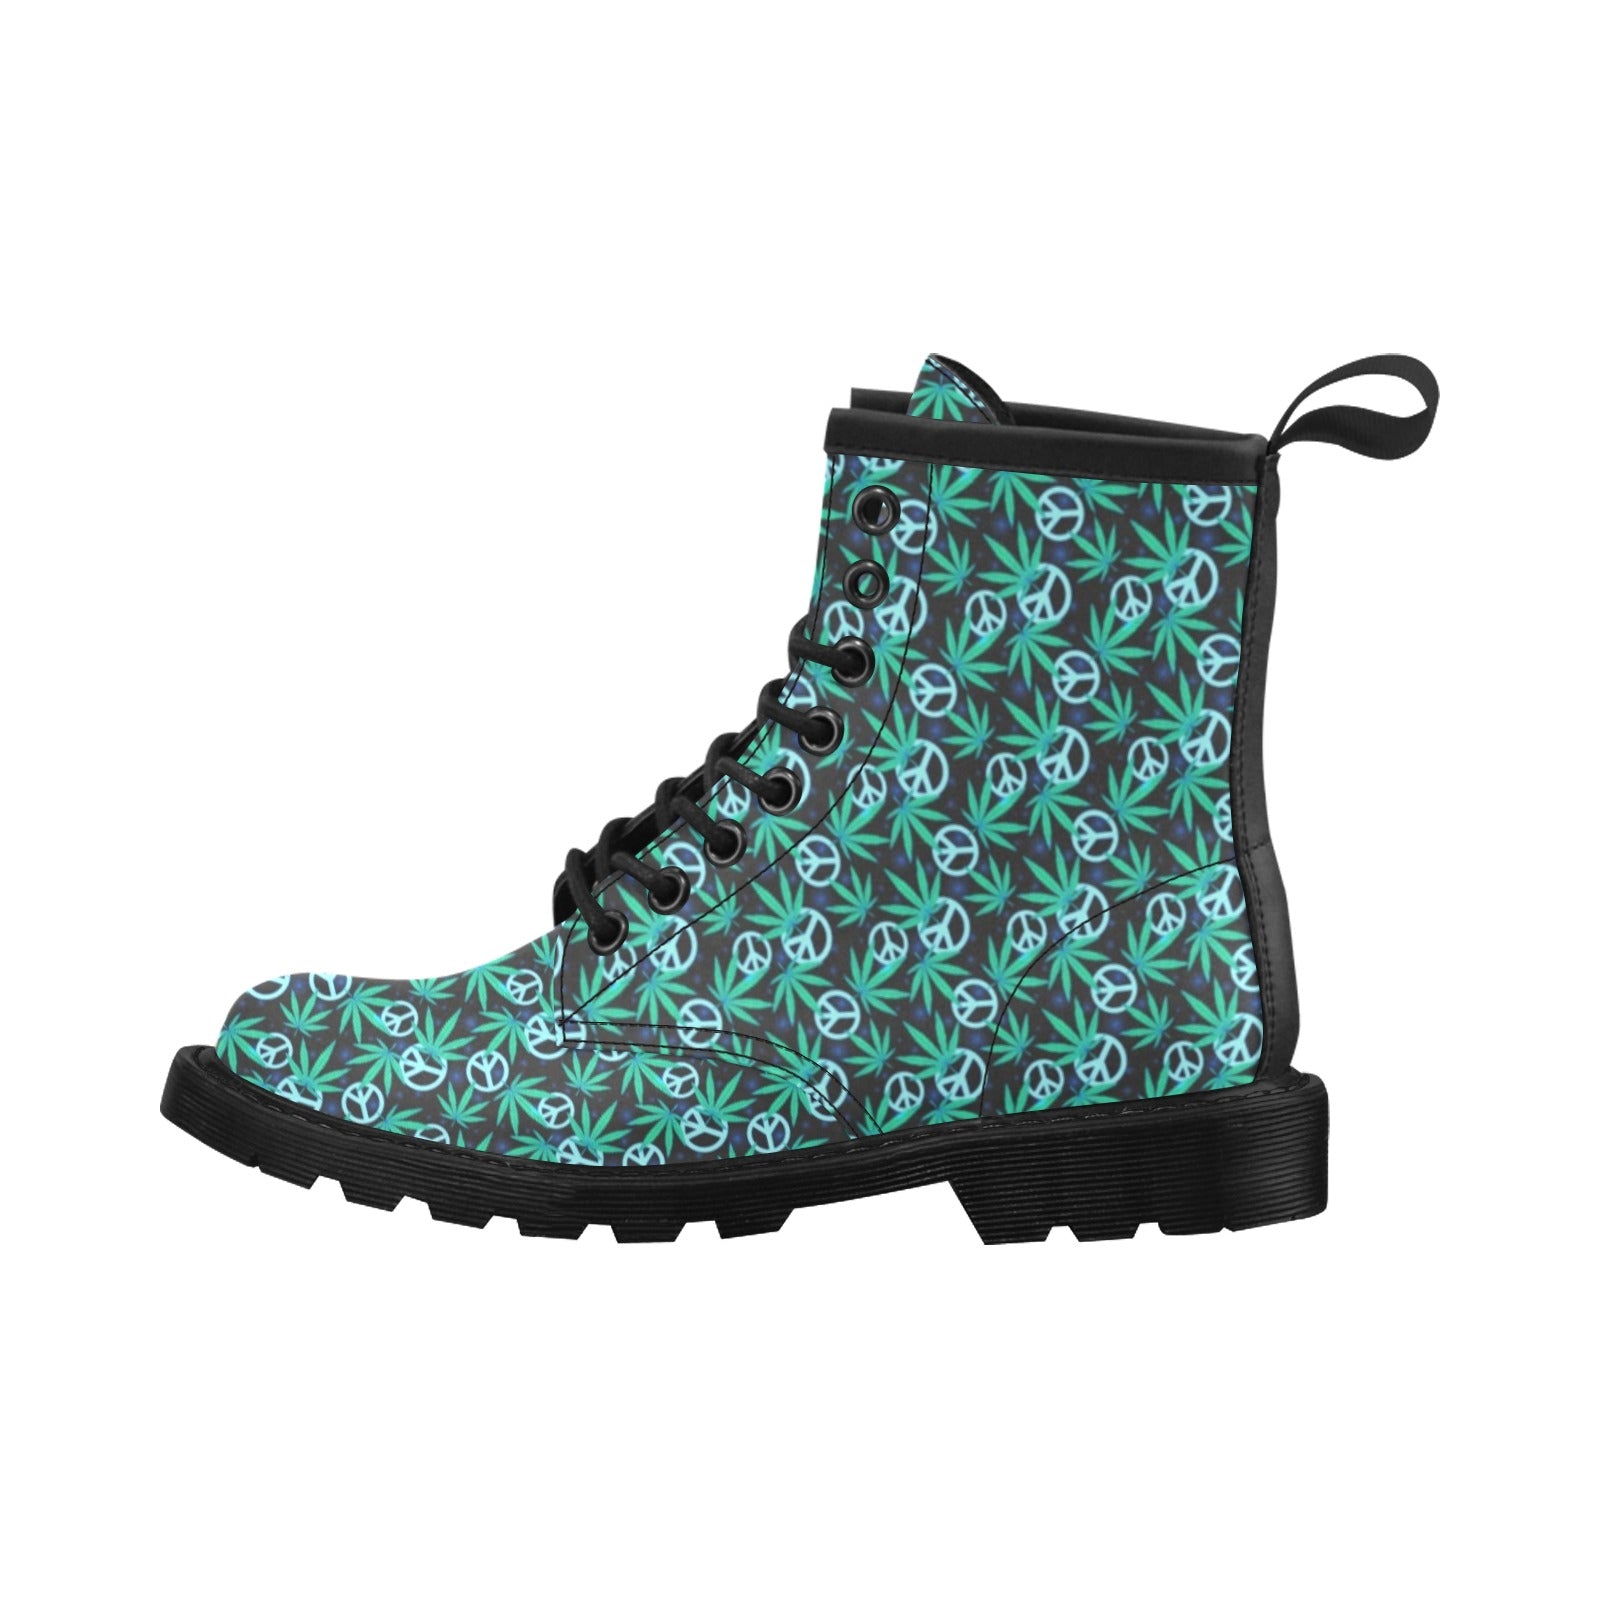 Peace Sign Themed Design Print Women's Boots